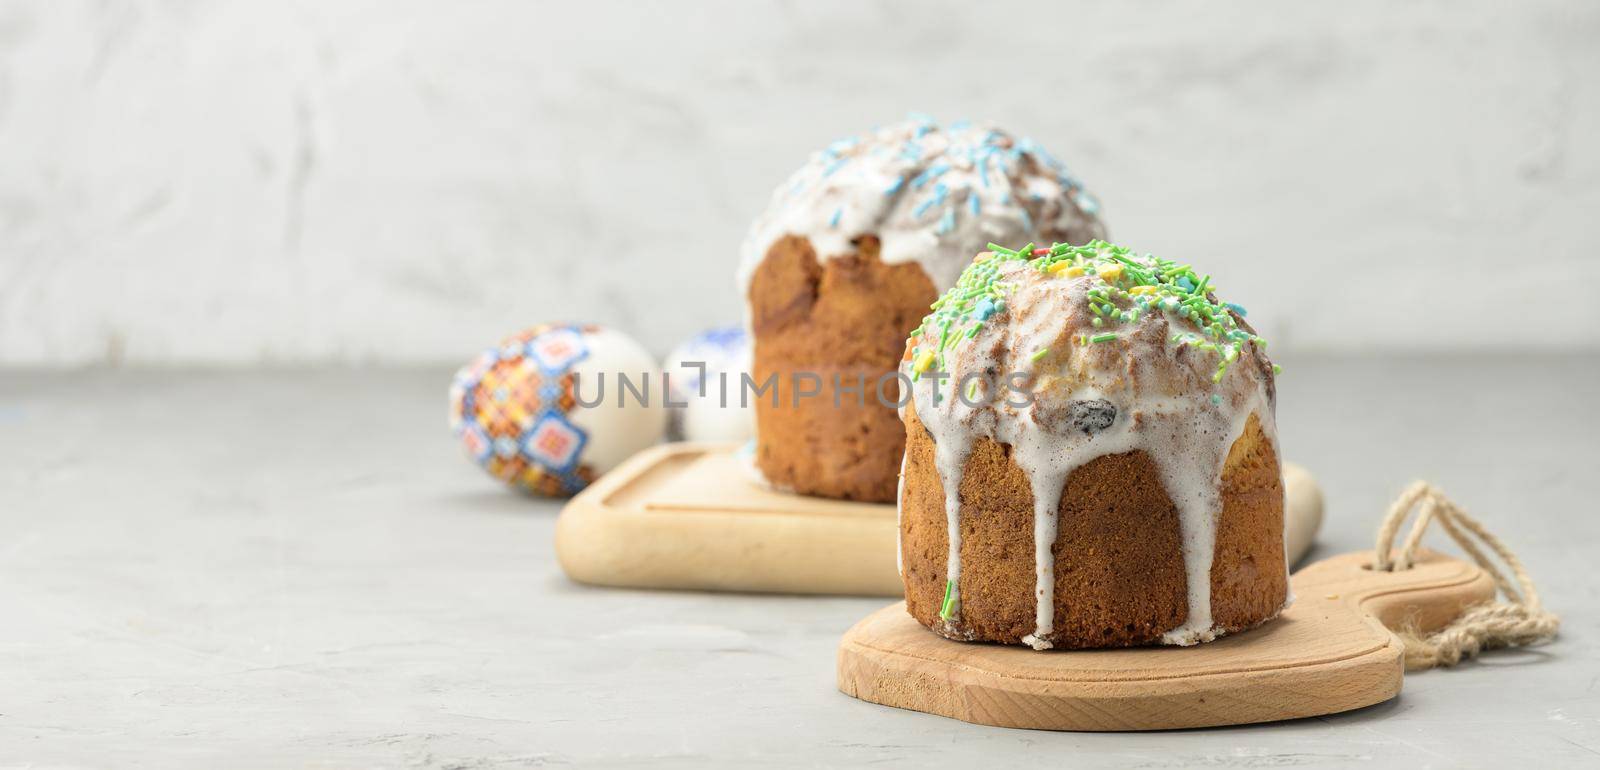 baked traditional Christian dessert for Easter holiday. The pastries are glazed and decorated with multi-colored sprinkles, white backgroundm copy space